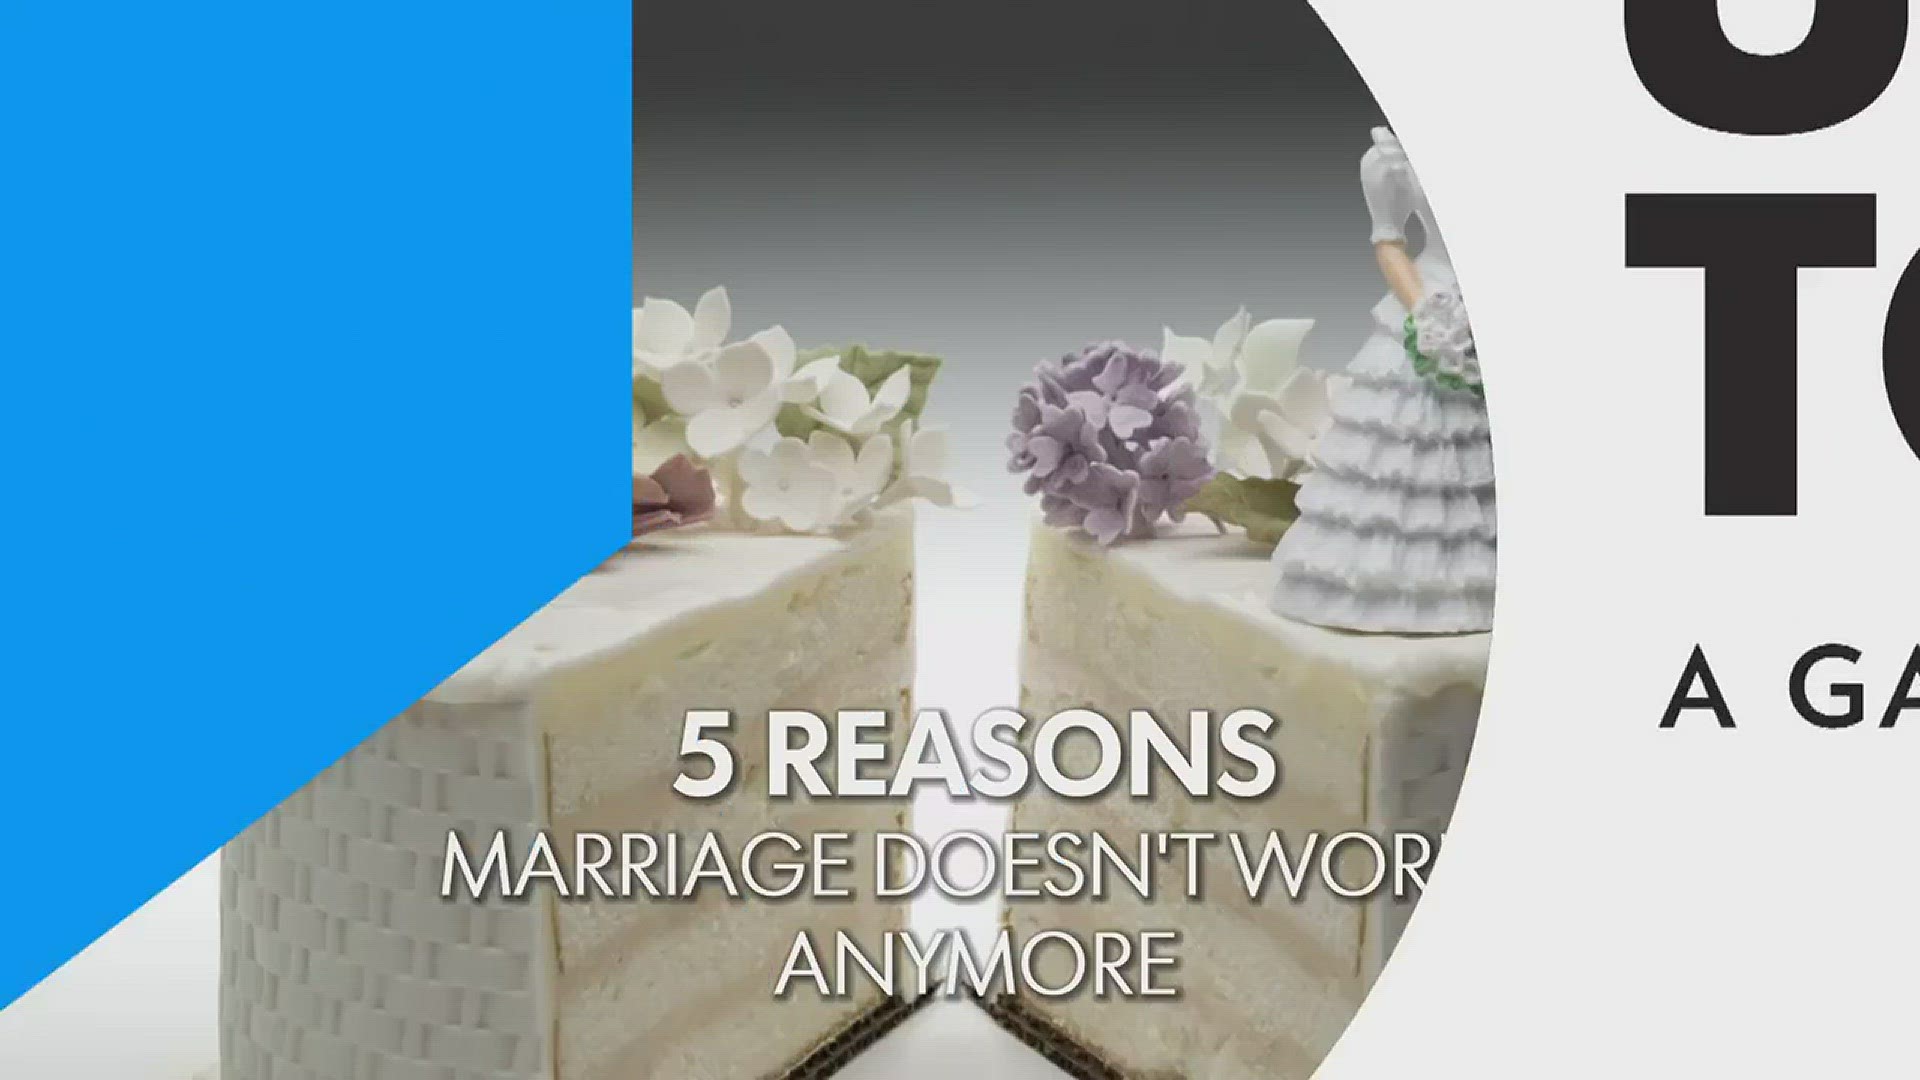 Sex columnist 5 reasons marriage doesnt work anymore 12news pic